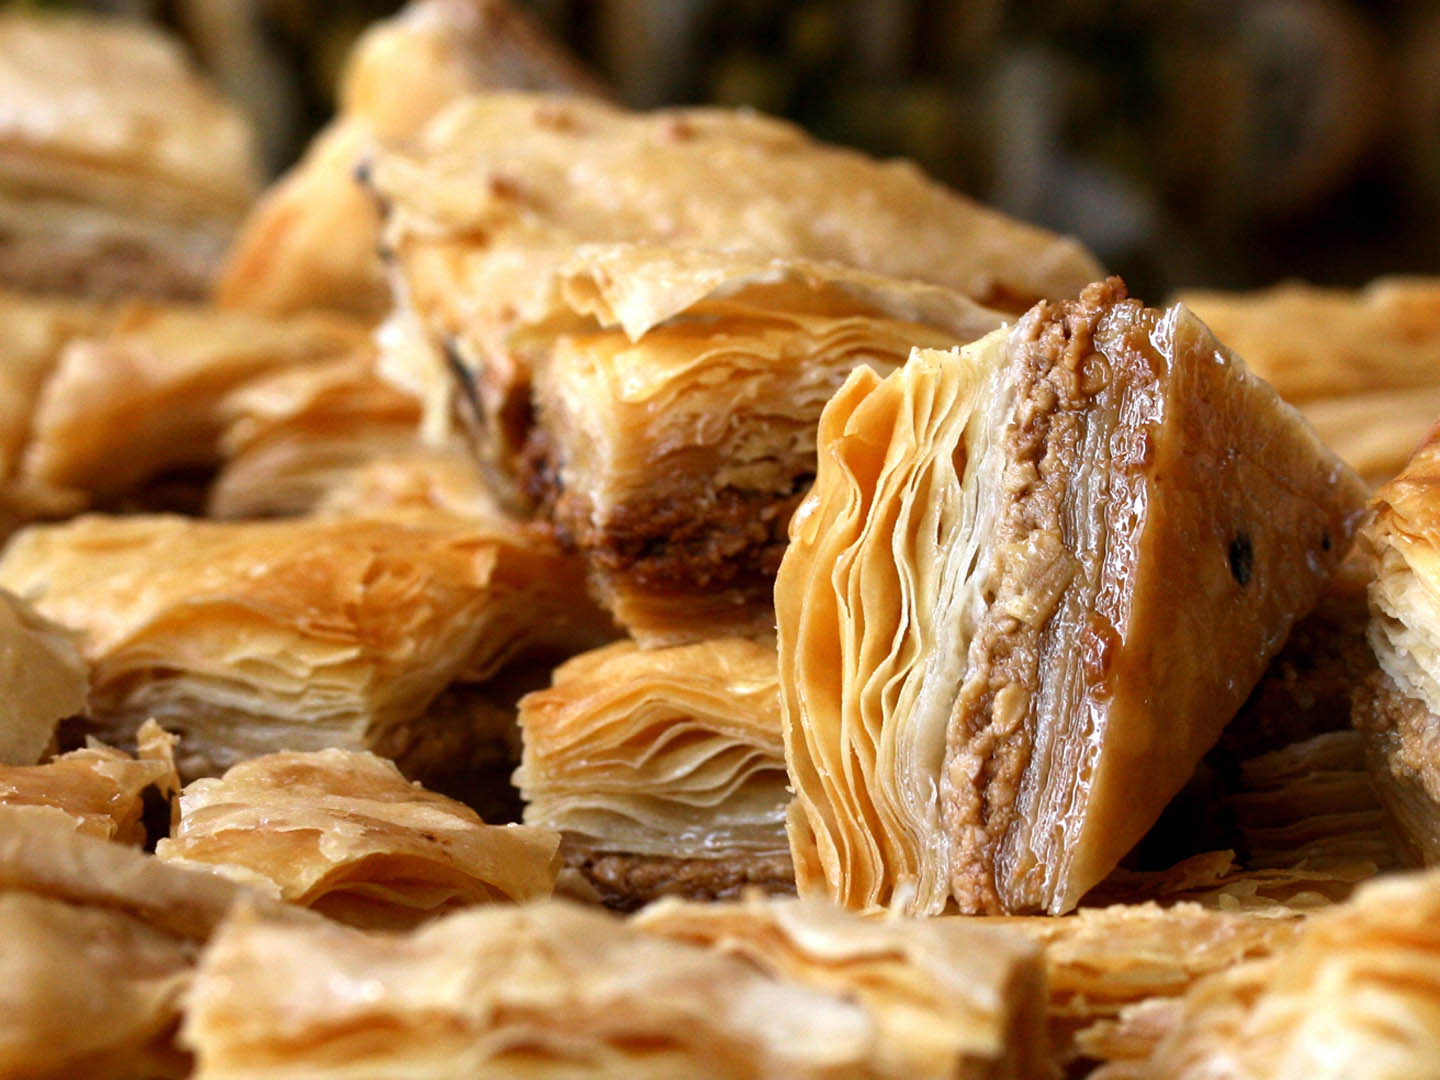 🥐 Can We Guess Your Age and Gender Based on the Pastries You’ve Eaten? Baklava